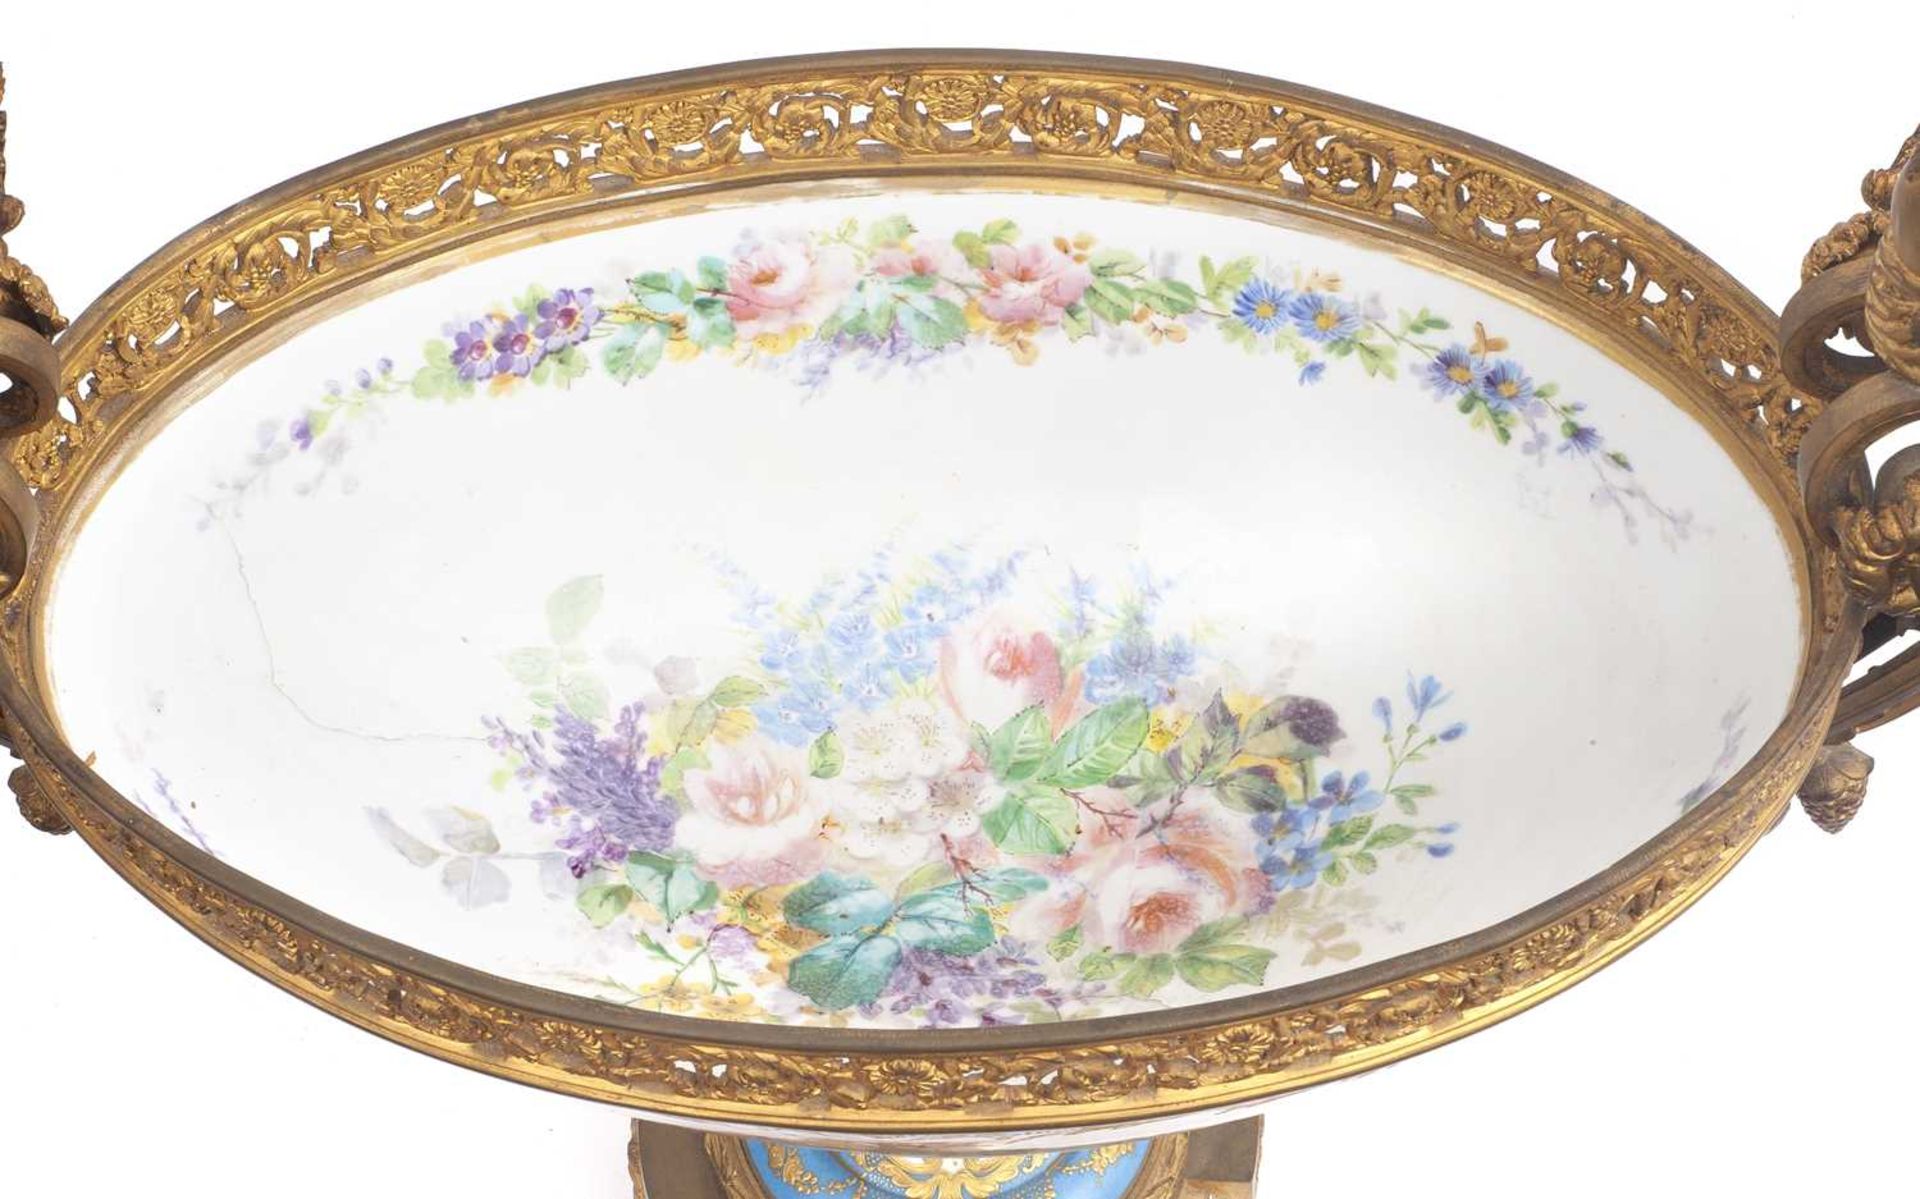 A VERY LARGE LATE 19TH CENTURY FRENCH SEVRES STYLE PORCELAIN AND ORMOLU MOUNTED JARDINIERE - Image 3 of 4